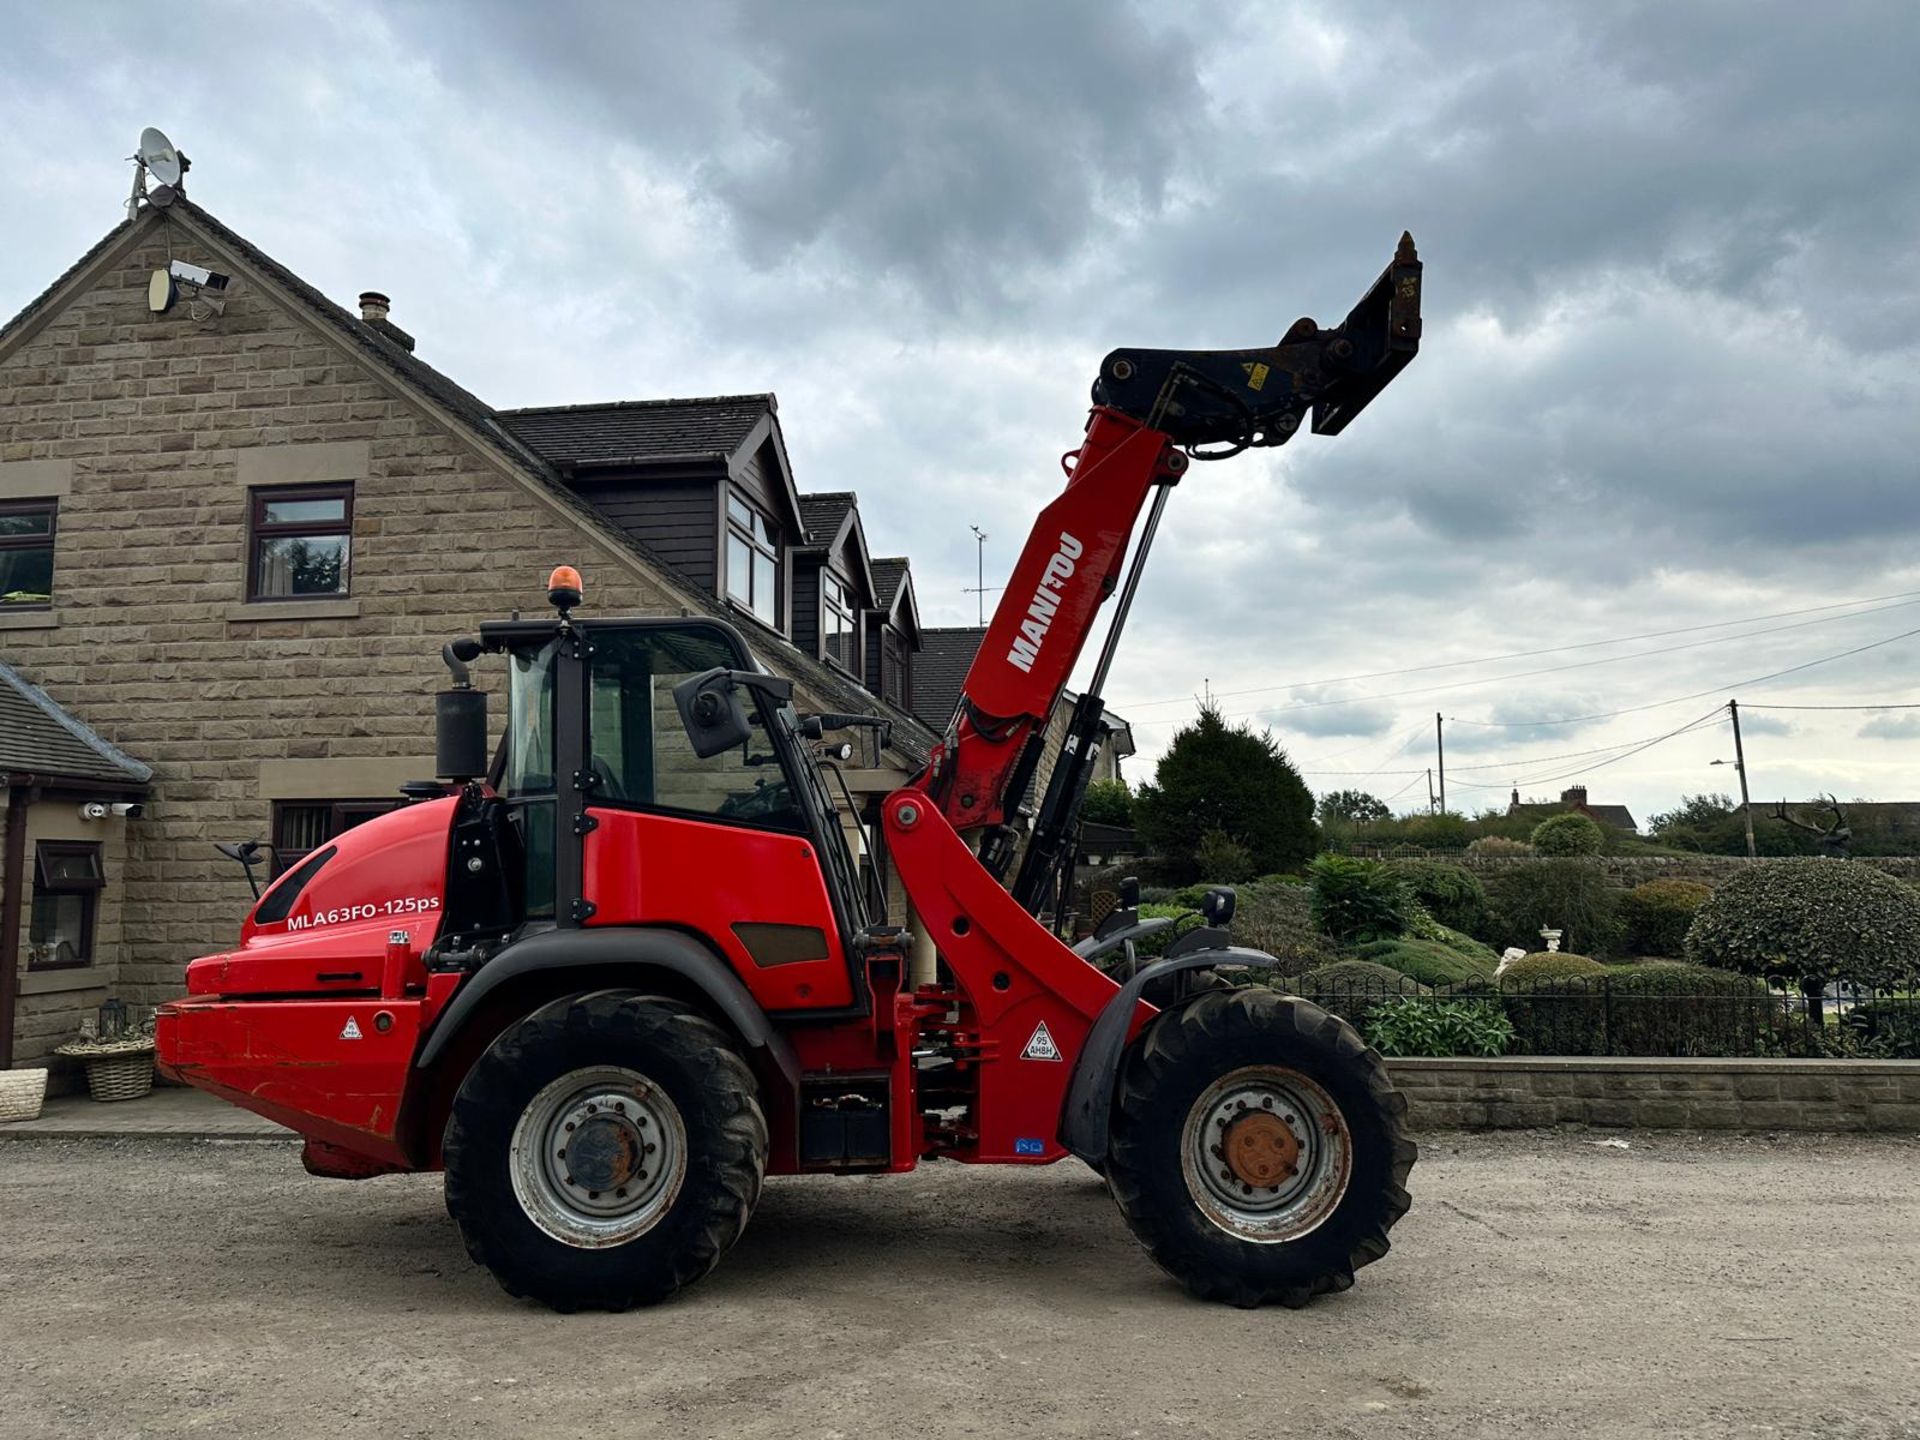 2013/14 Manitou MLA63FO-125ps 4WD Articulated Telescopic Forklift/Telehandler *PLUS VAT* - Image 4 of 20